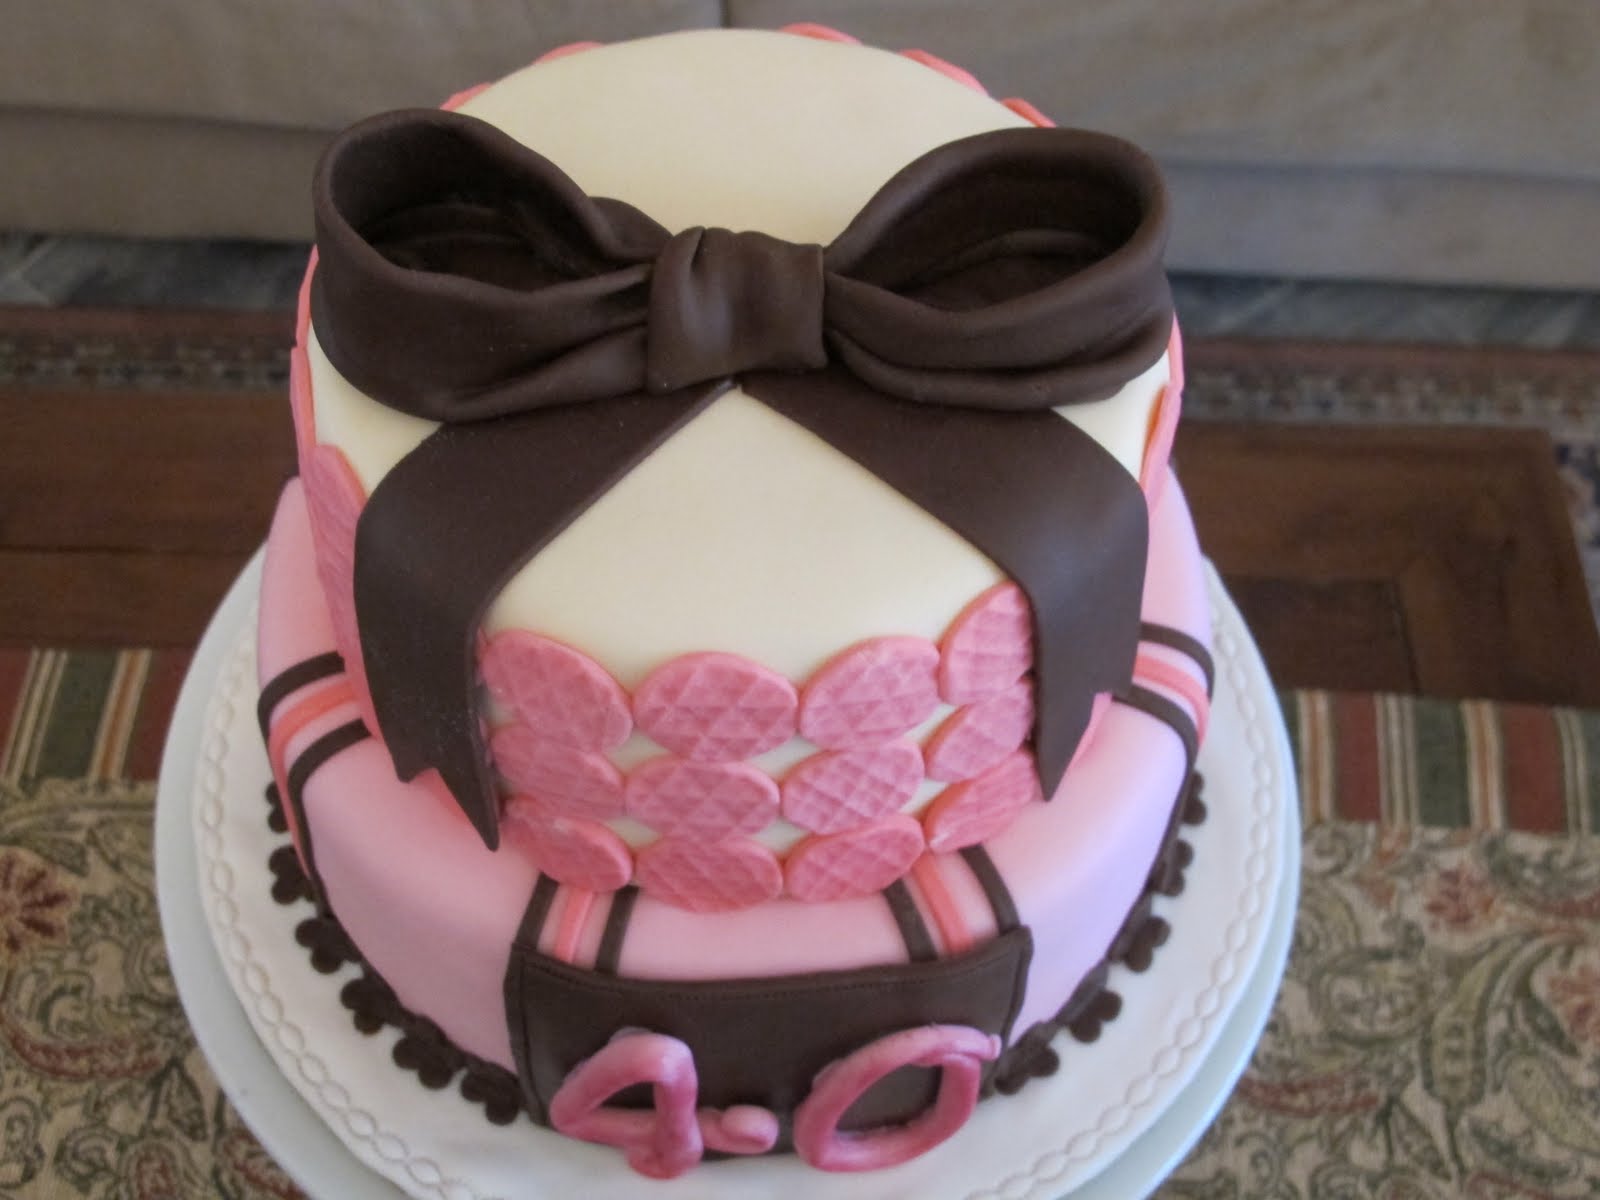 Pink Oven Cakes and Cookies: 40th birthday cake